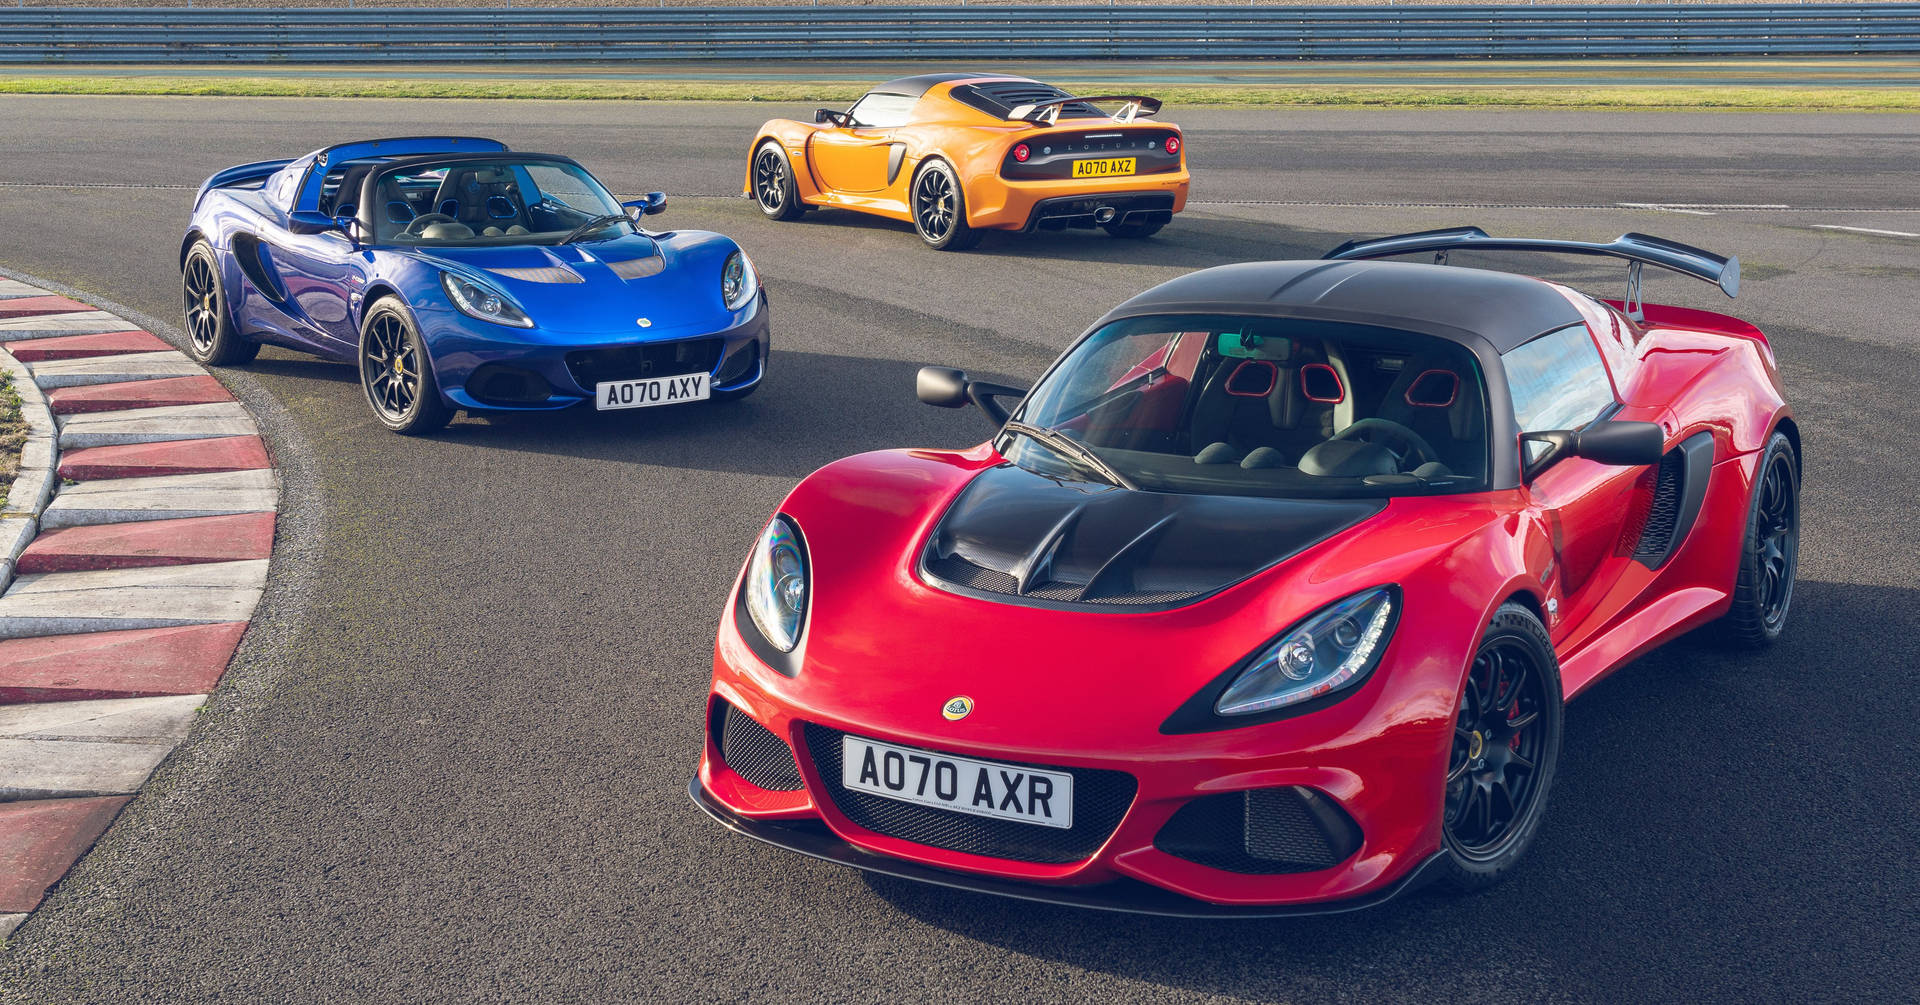 Primary Colored Lotus Exige Cars Wallpaper